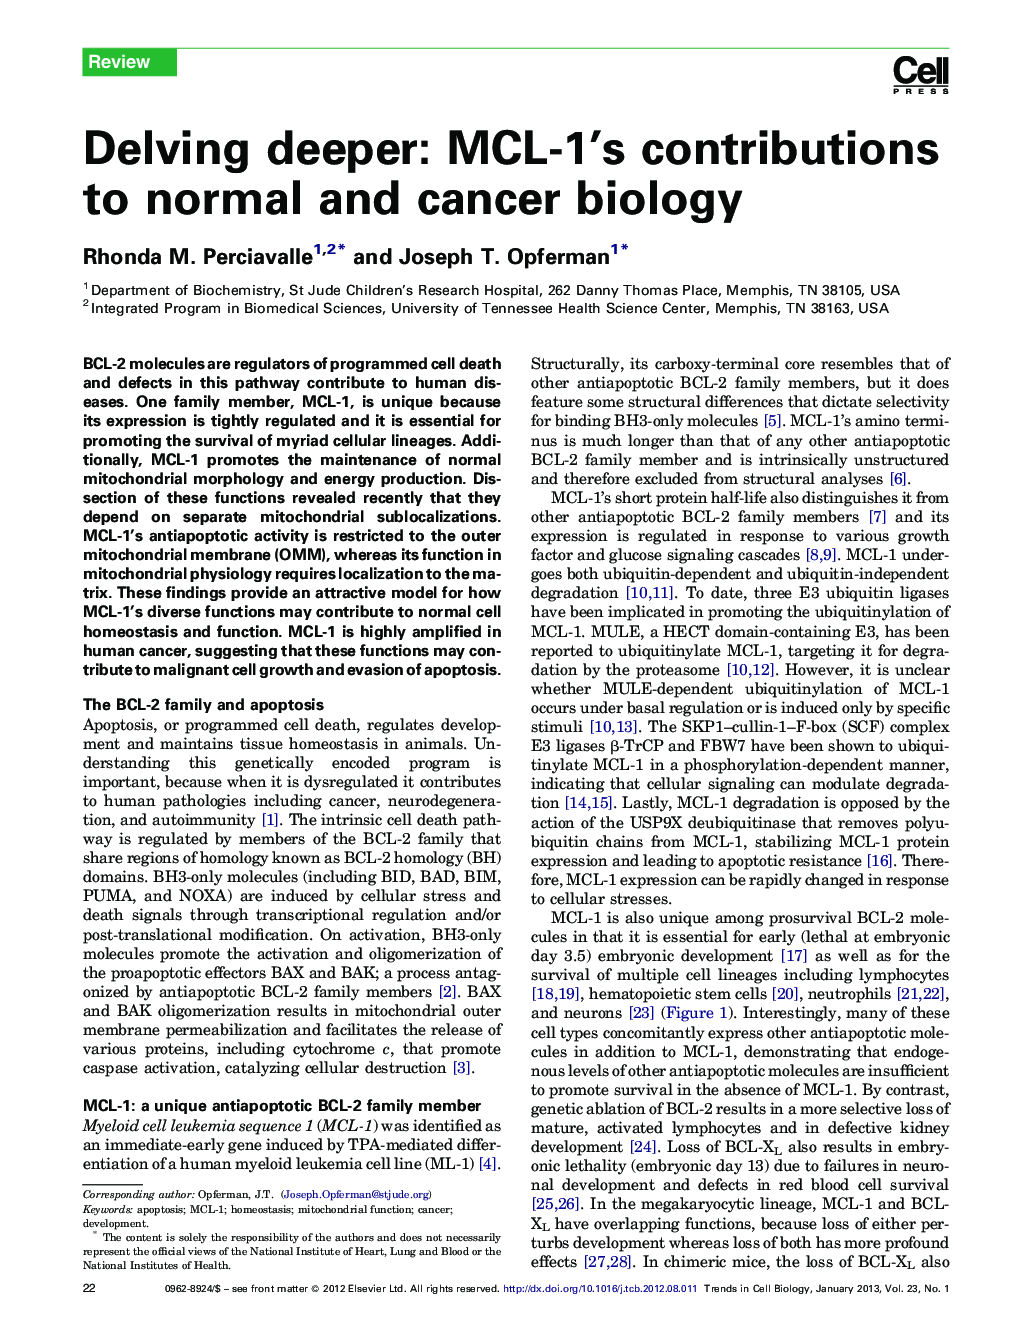 Delving deeper: MCL-1's contributions to normal and cancer biology